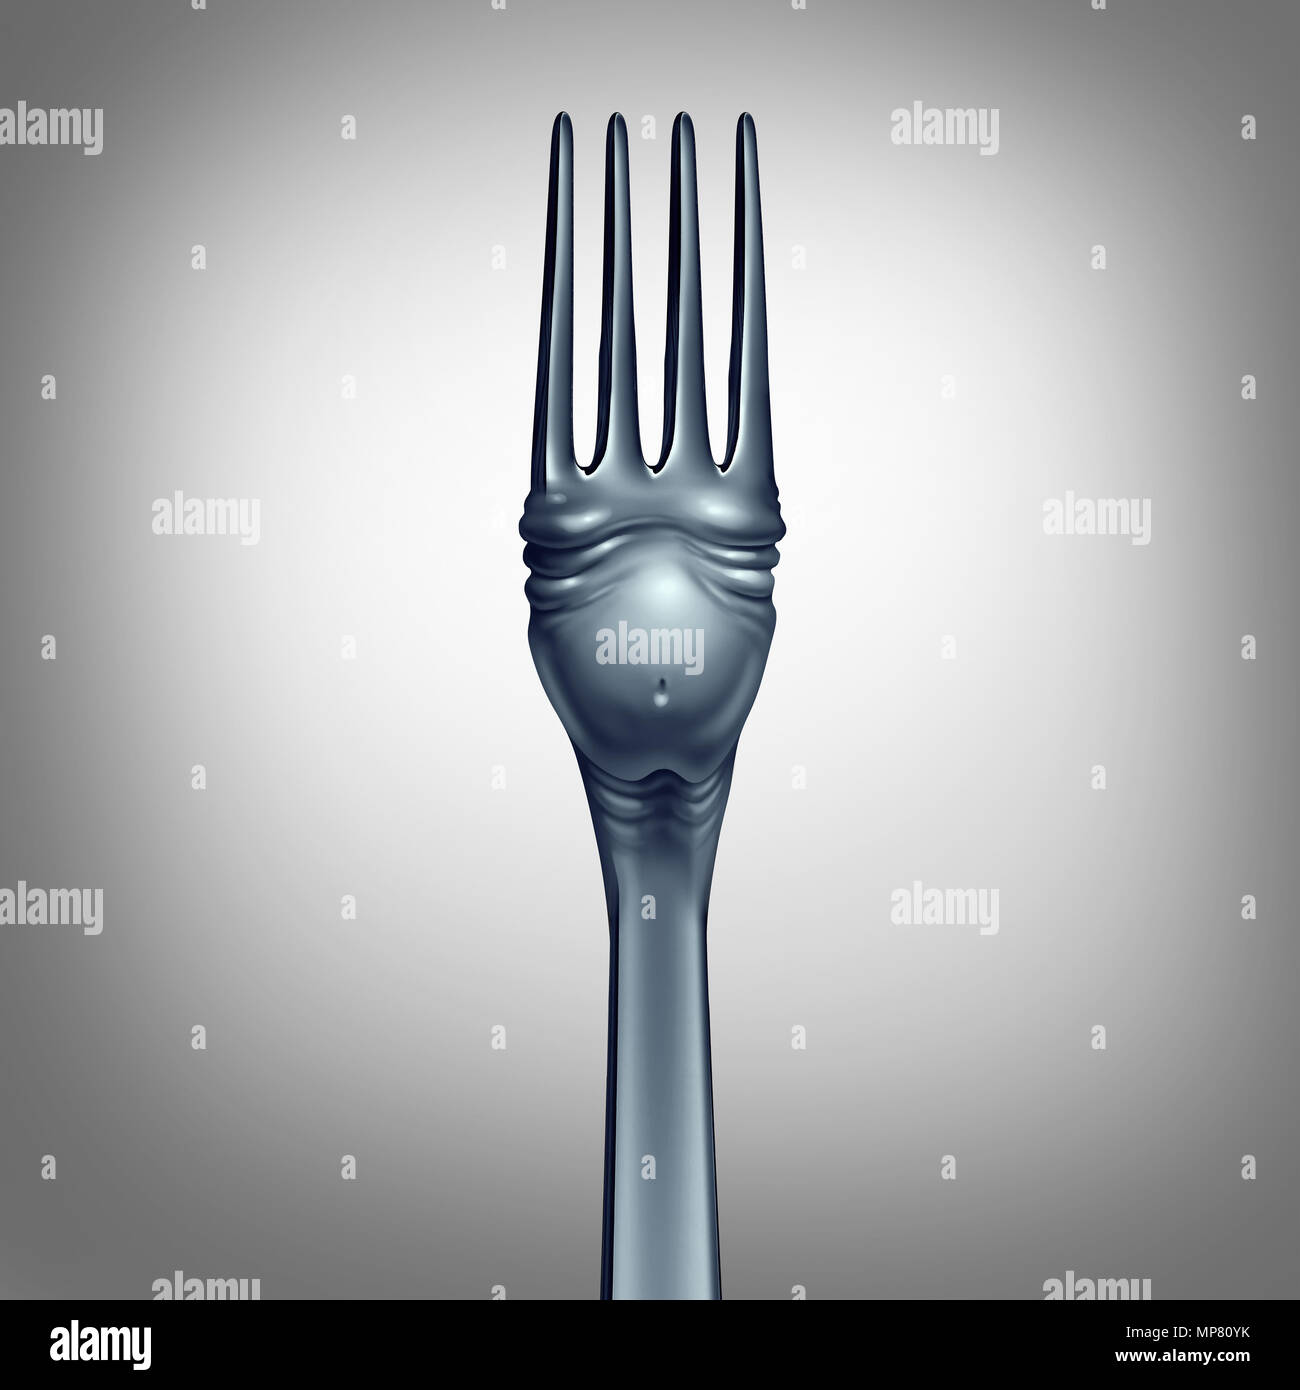 Concept of obesity and overeating symbol as a fork shaped as a fat belly body mass or overweight obese abdomen as a 3D illustration. Stock Photo